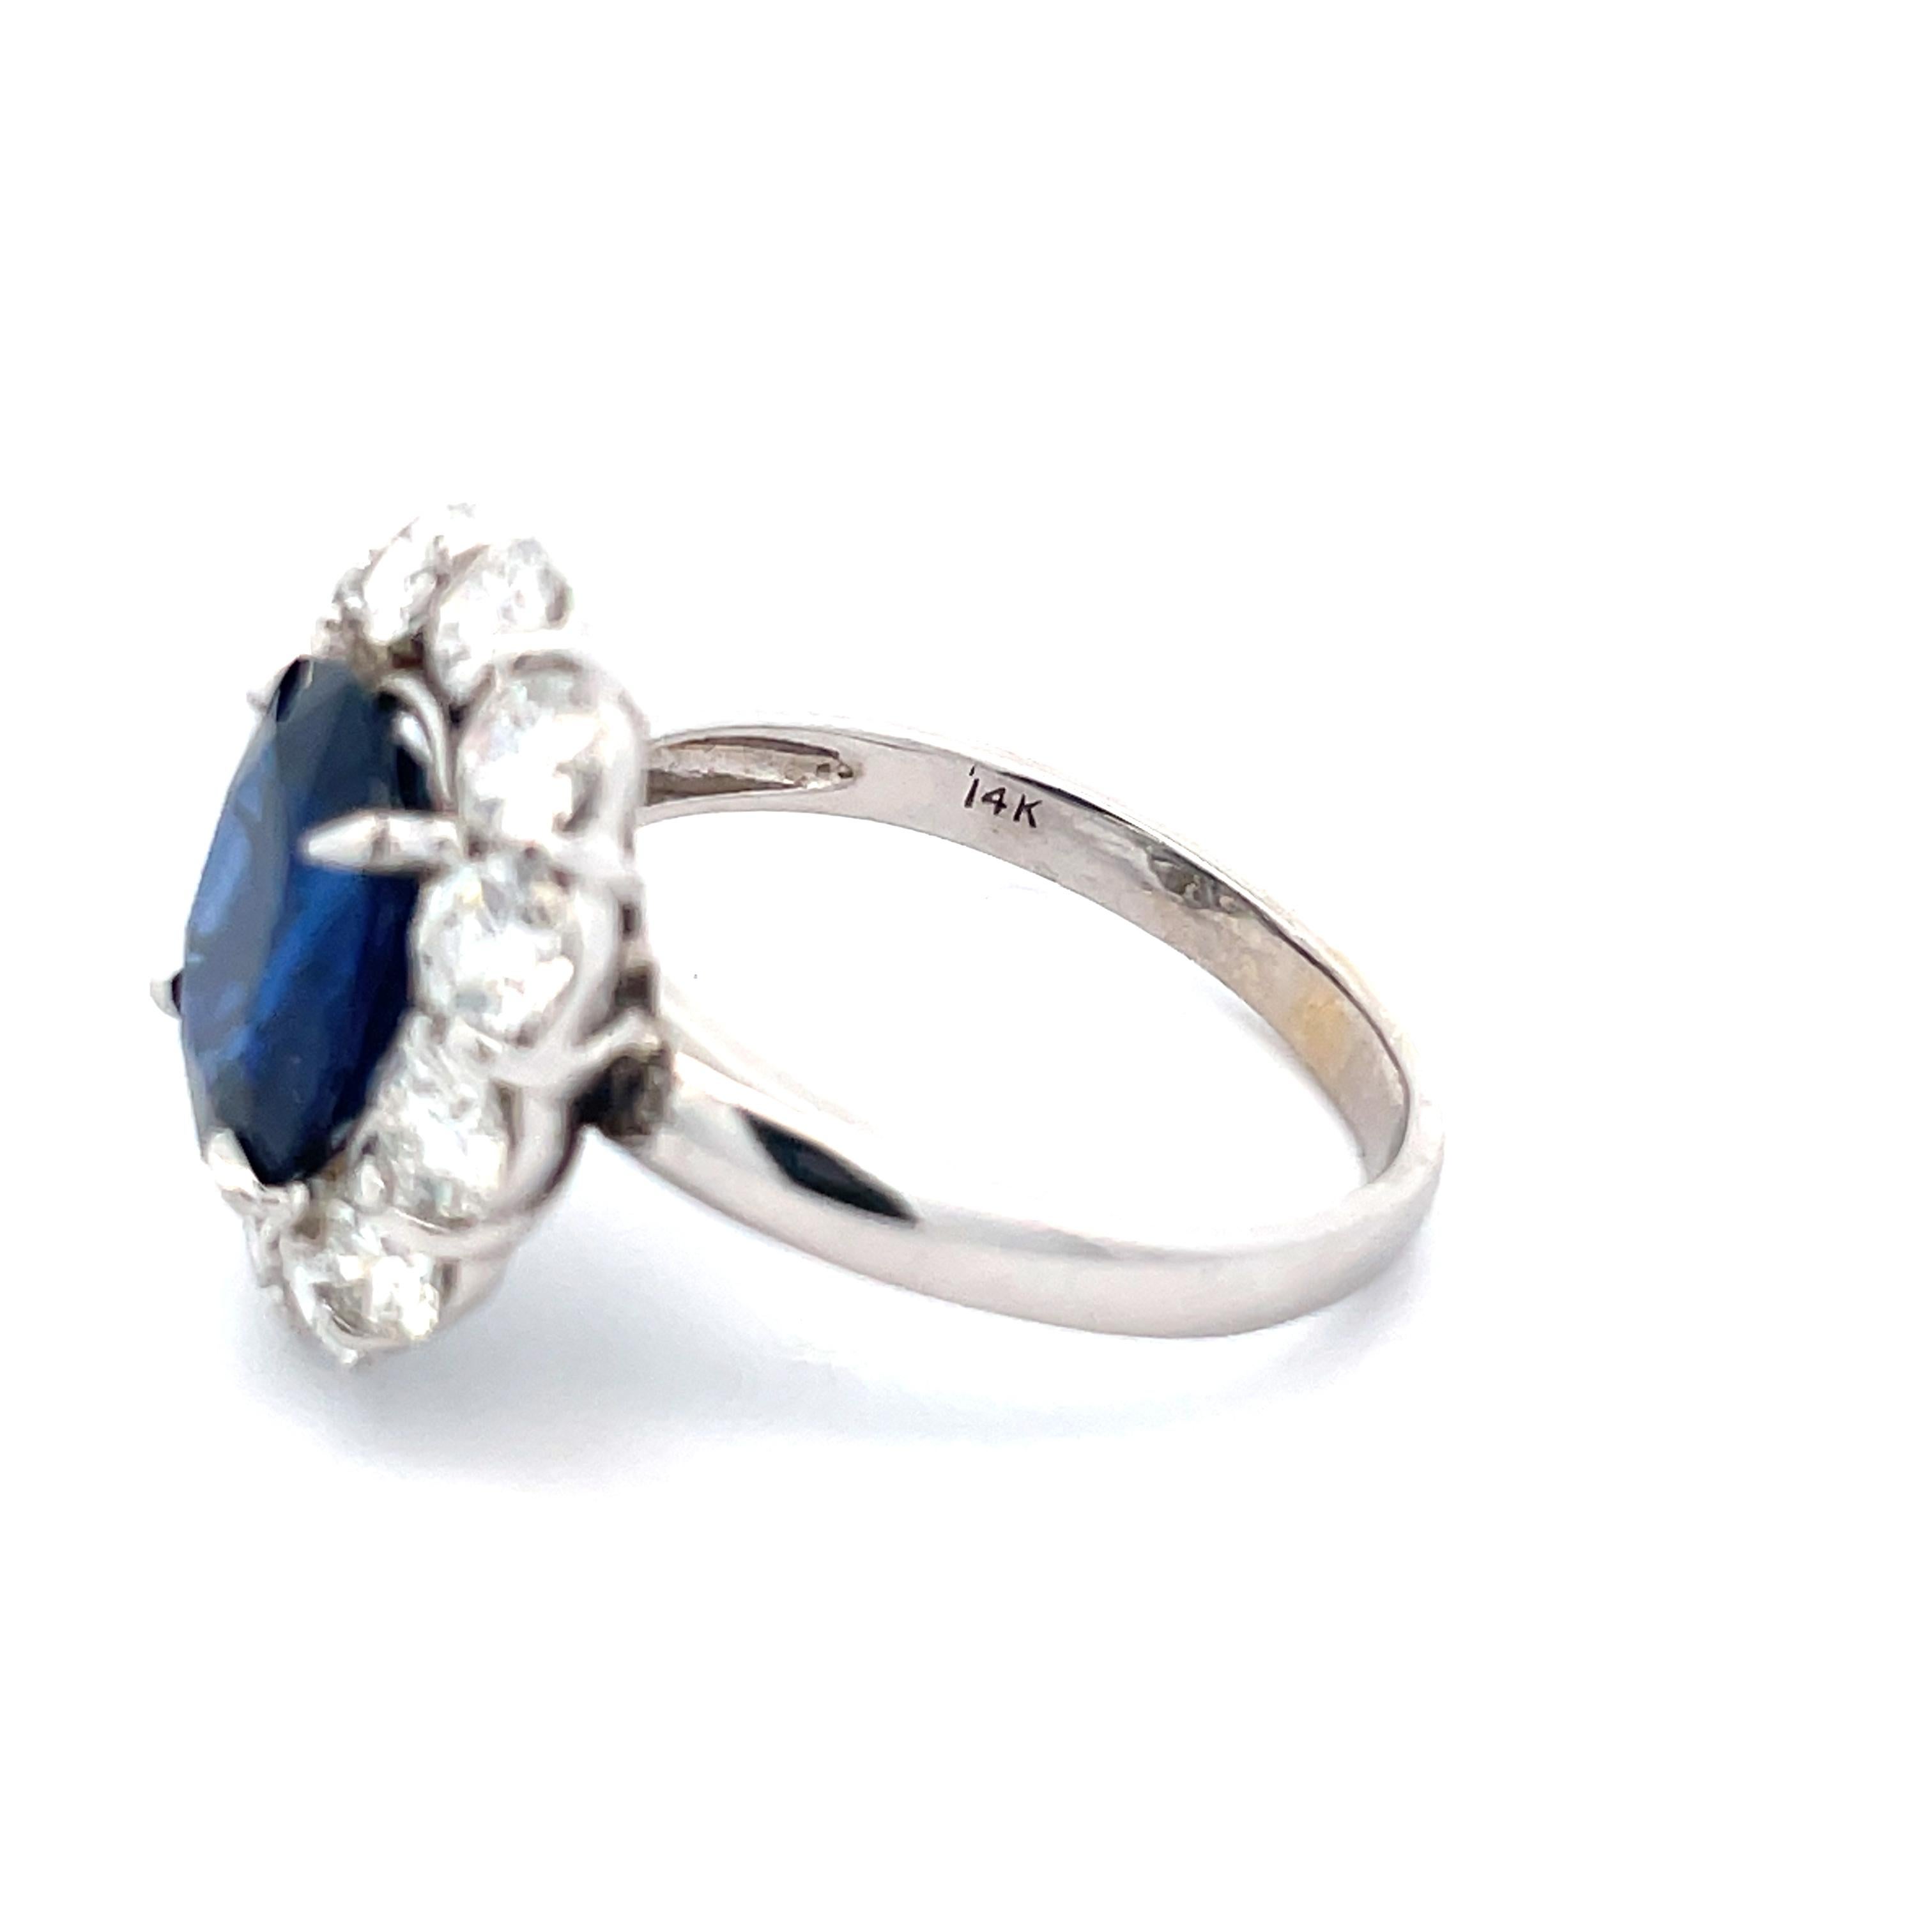  14K White Gold Contemporary Lady Di Ring Blue Sapphire and Diamond  In Excellent Condition For Sale In Lexington, KY